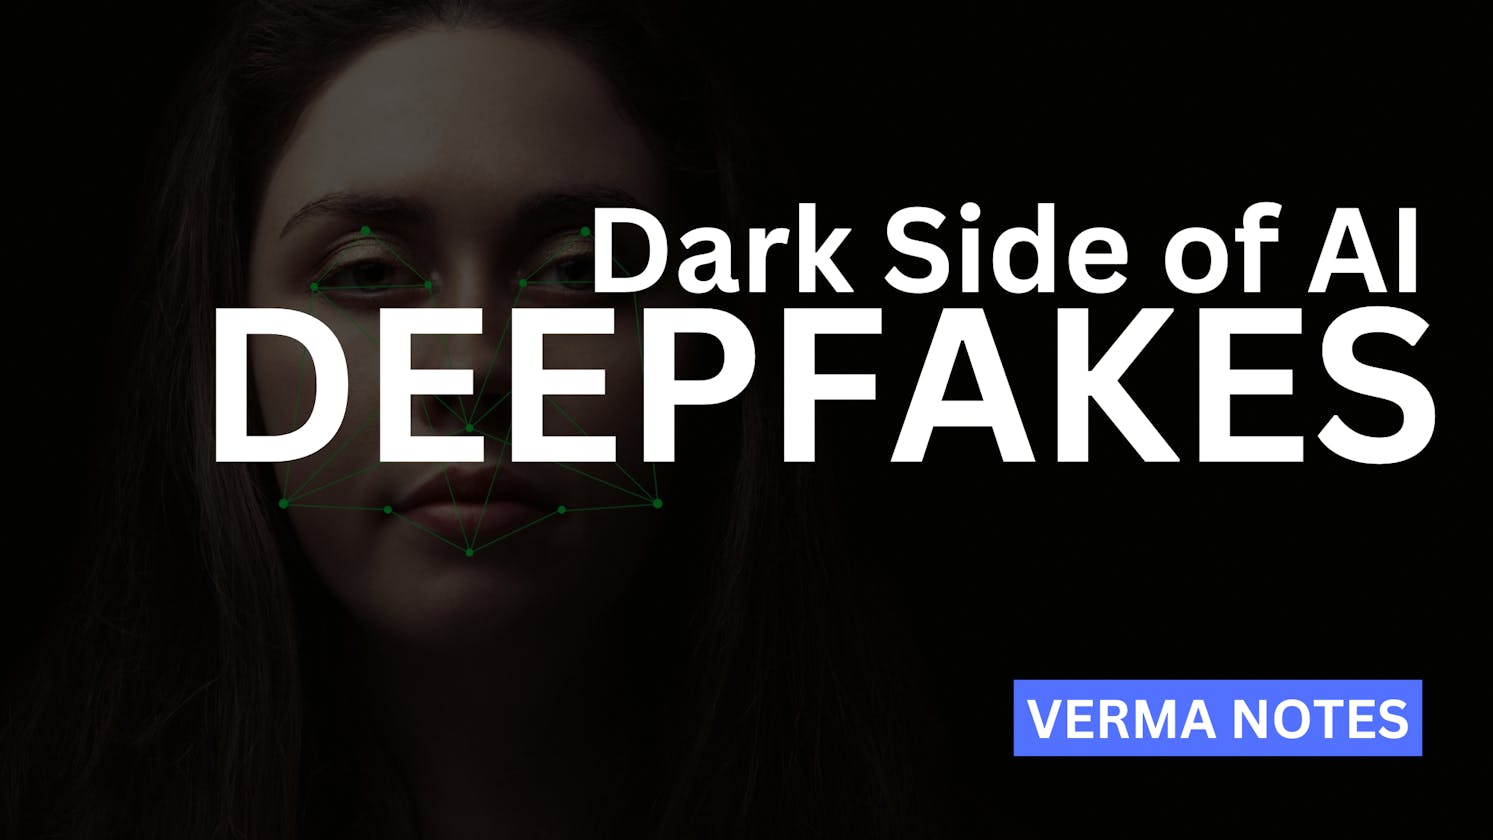 The Dark Side of A.I. : Understanding the Dangers of Deepfake Images